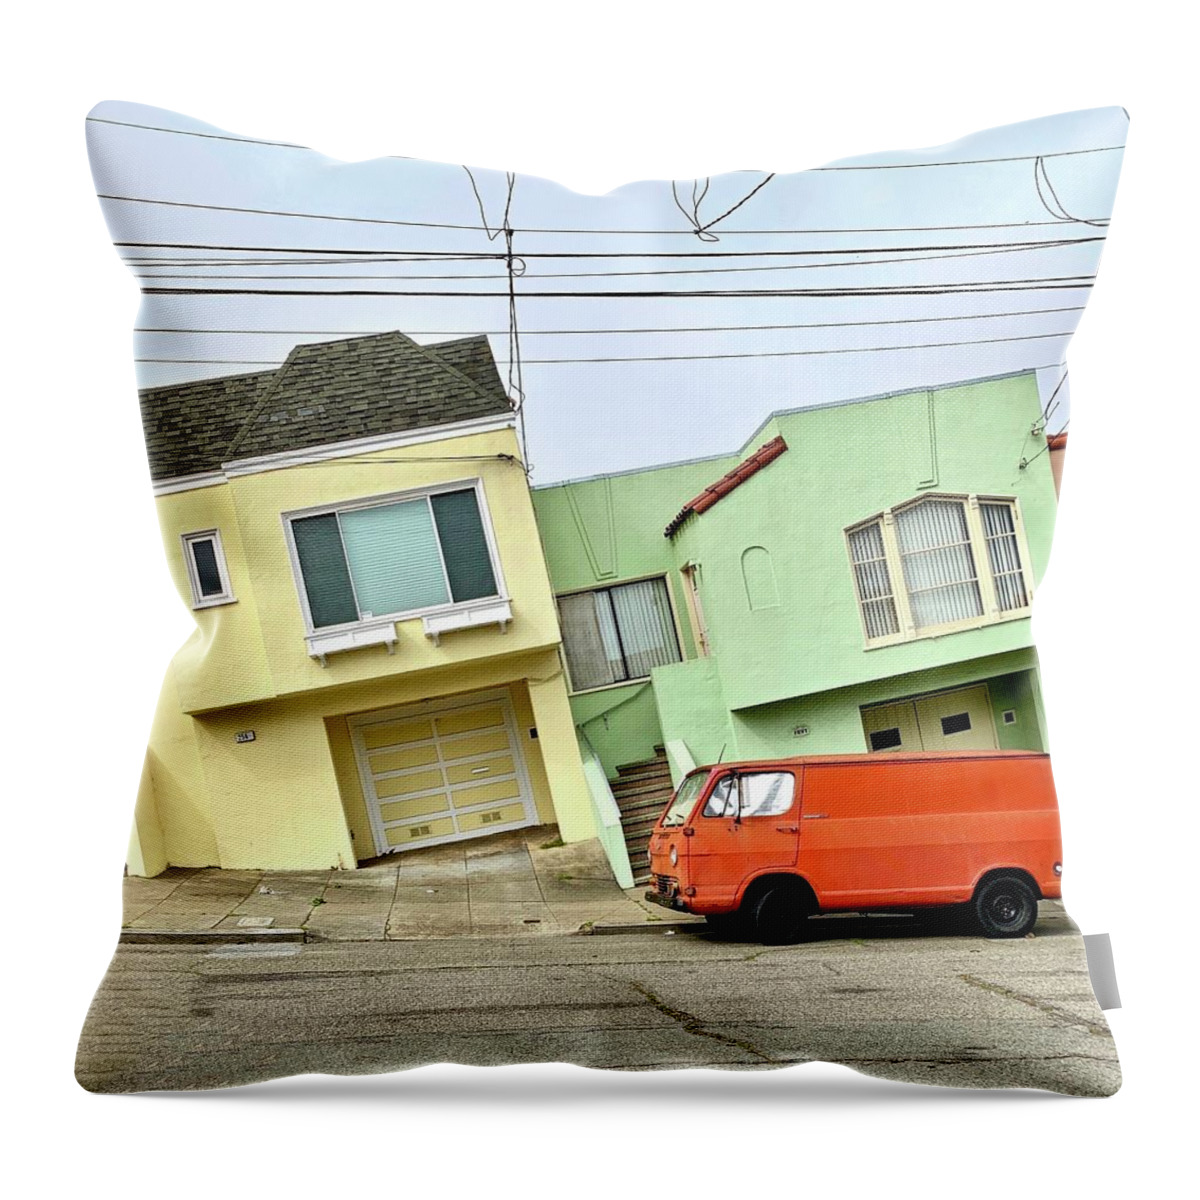  Throw Pillow featuring the photograph Tilted Houses by Julie Gebhardt